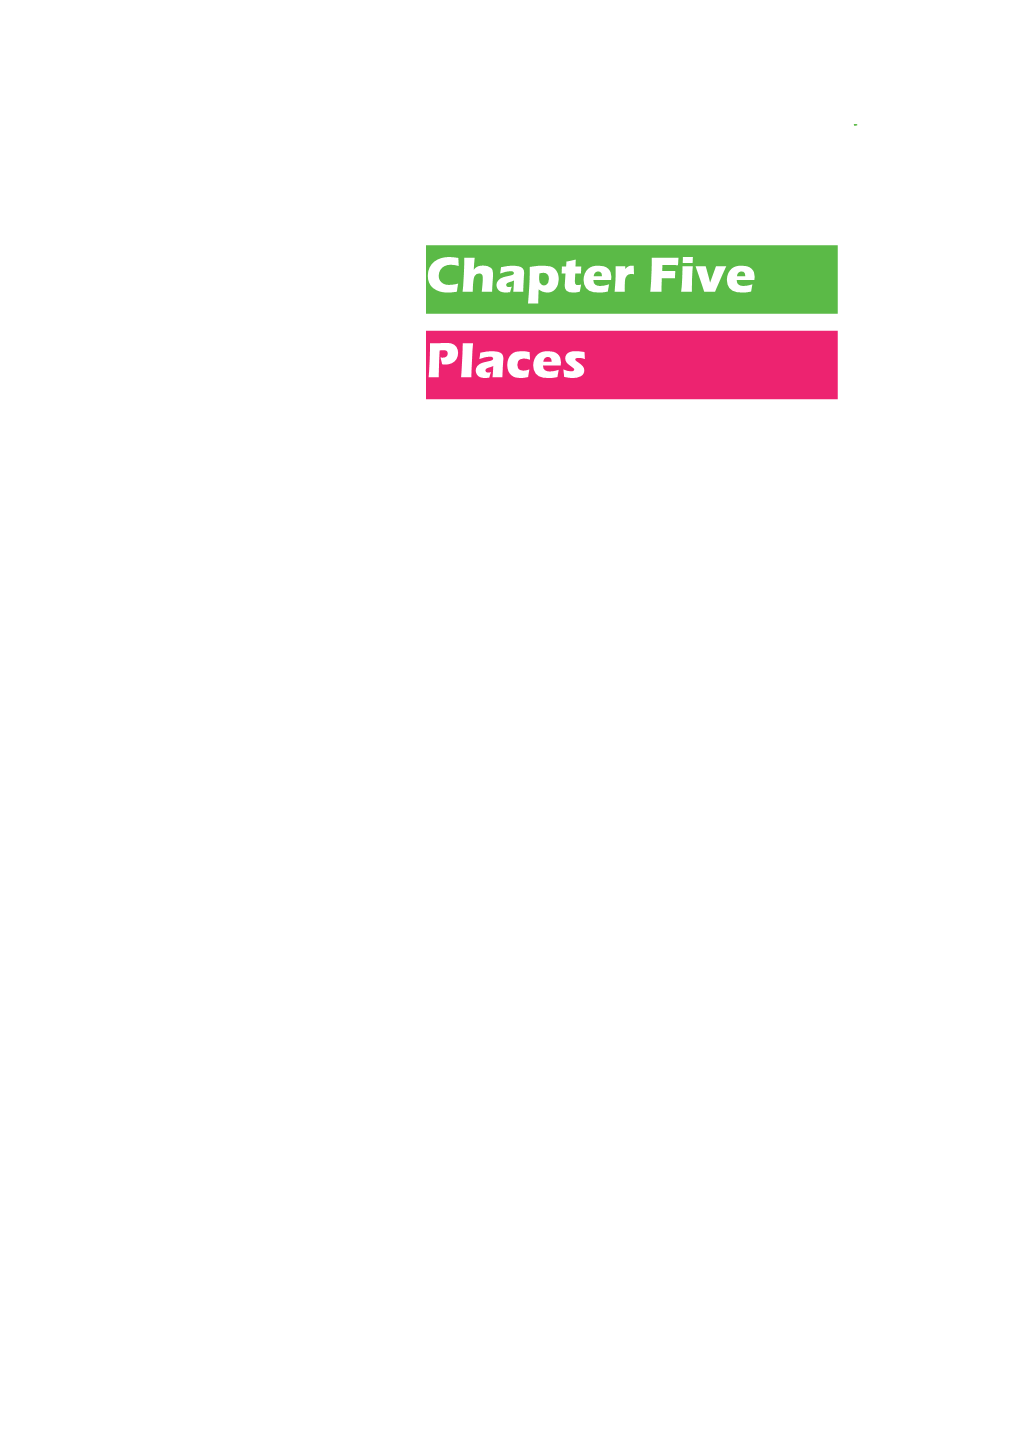 Chapter Five Places